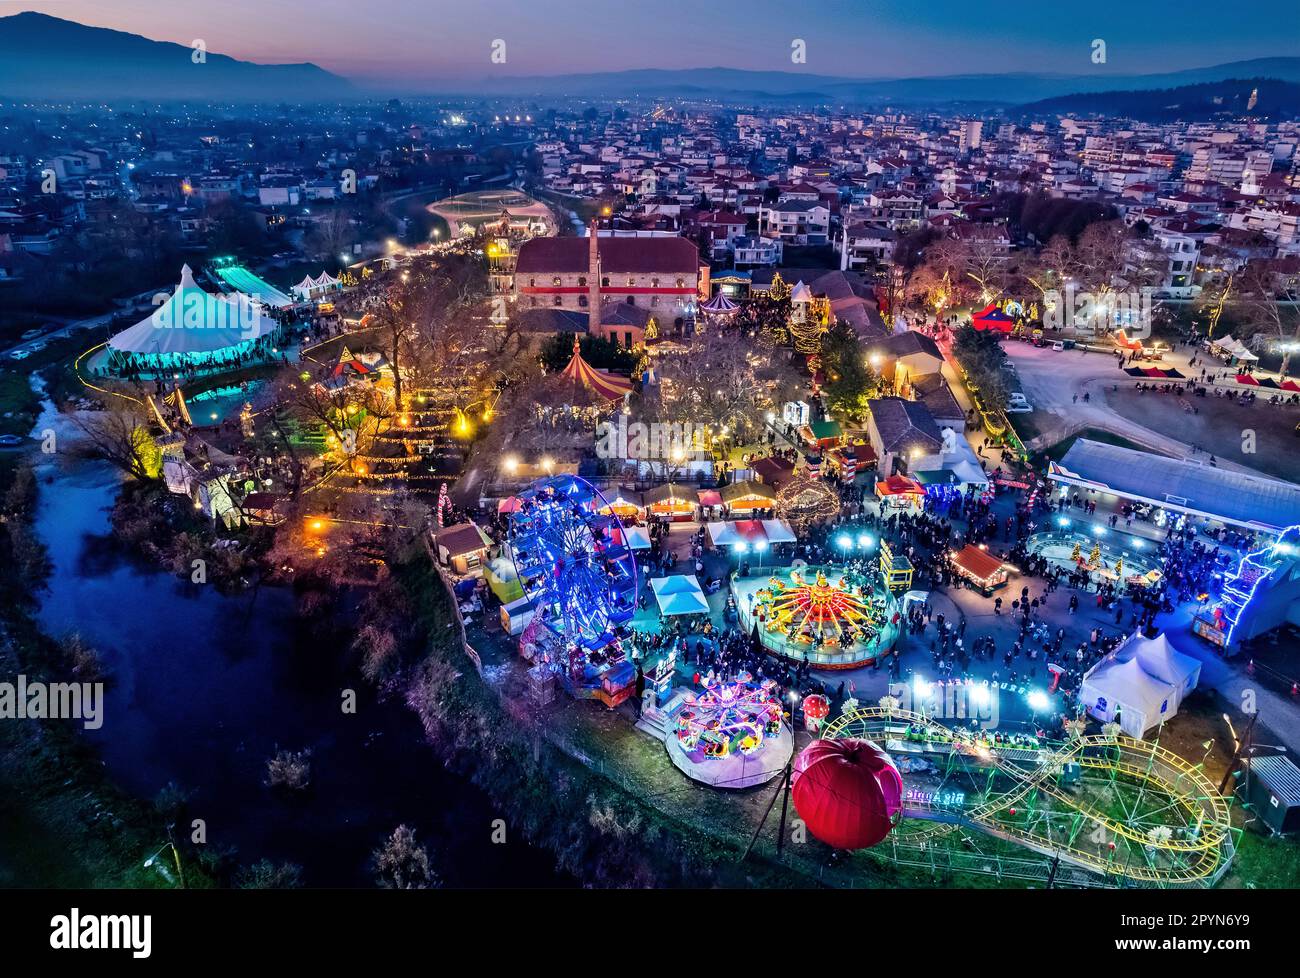 The 'Mill of Elves' ('Μύλος των Ξωτικών'), Trikala, Thessaly, Greece. It is the most famous and popular 'Christmas village' in Greece. Stock Photo